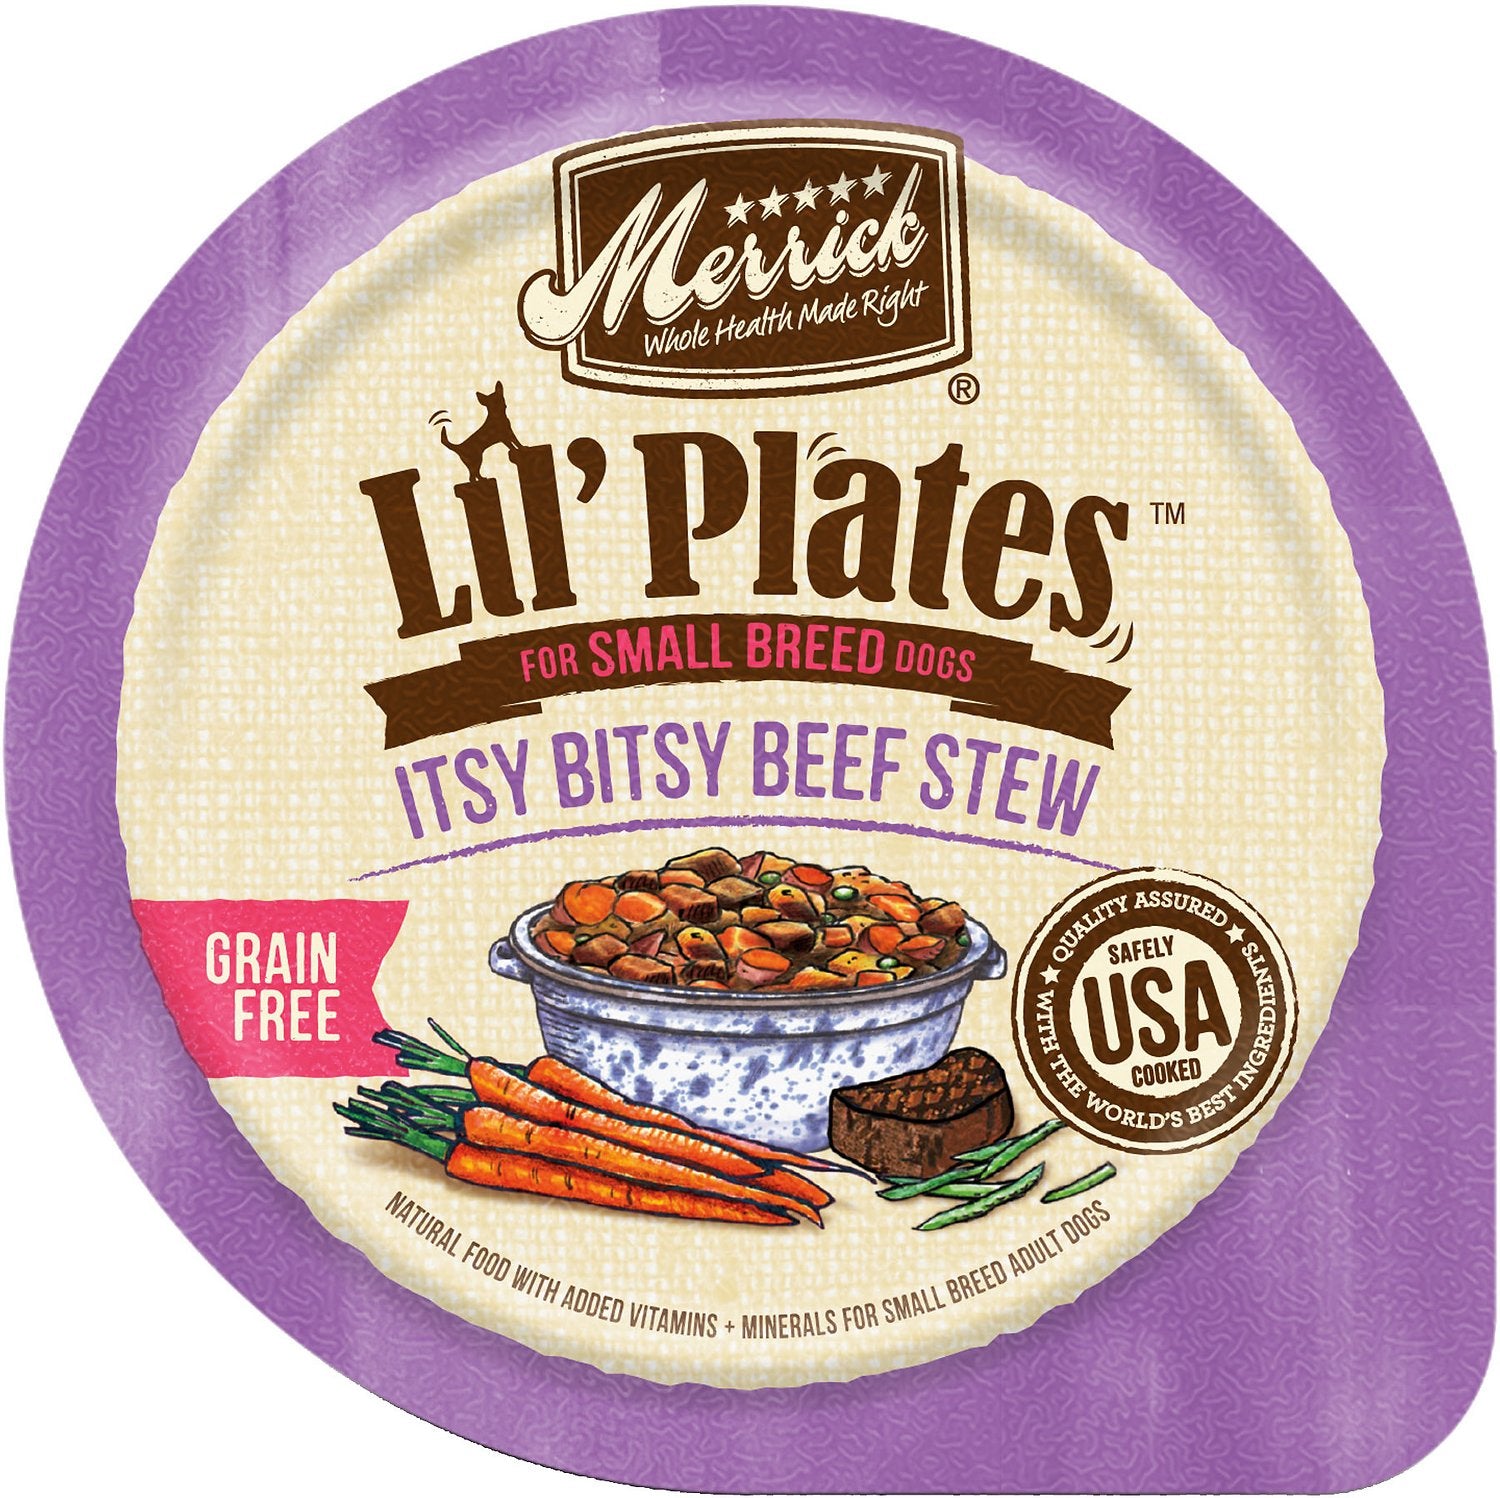 Merrick Lil' Plates Grain Free Variety Pack Itsy Bitsy Beef Stew(Wet Dog Food)